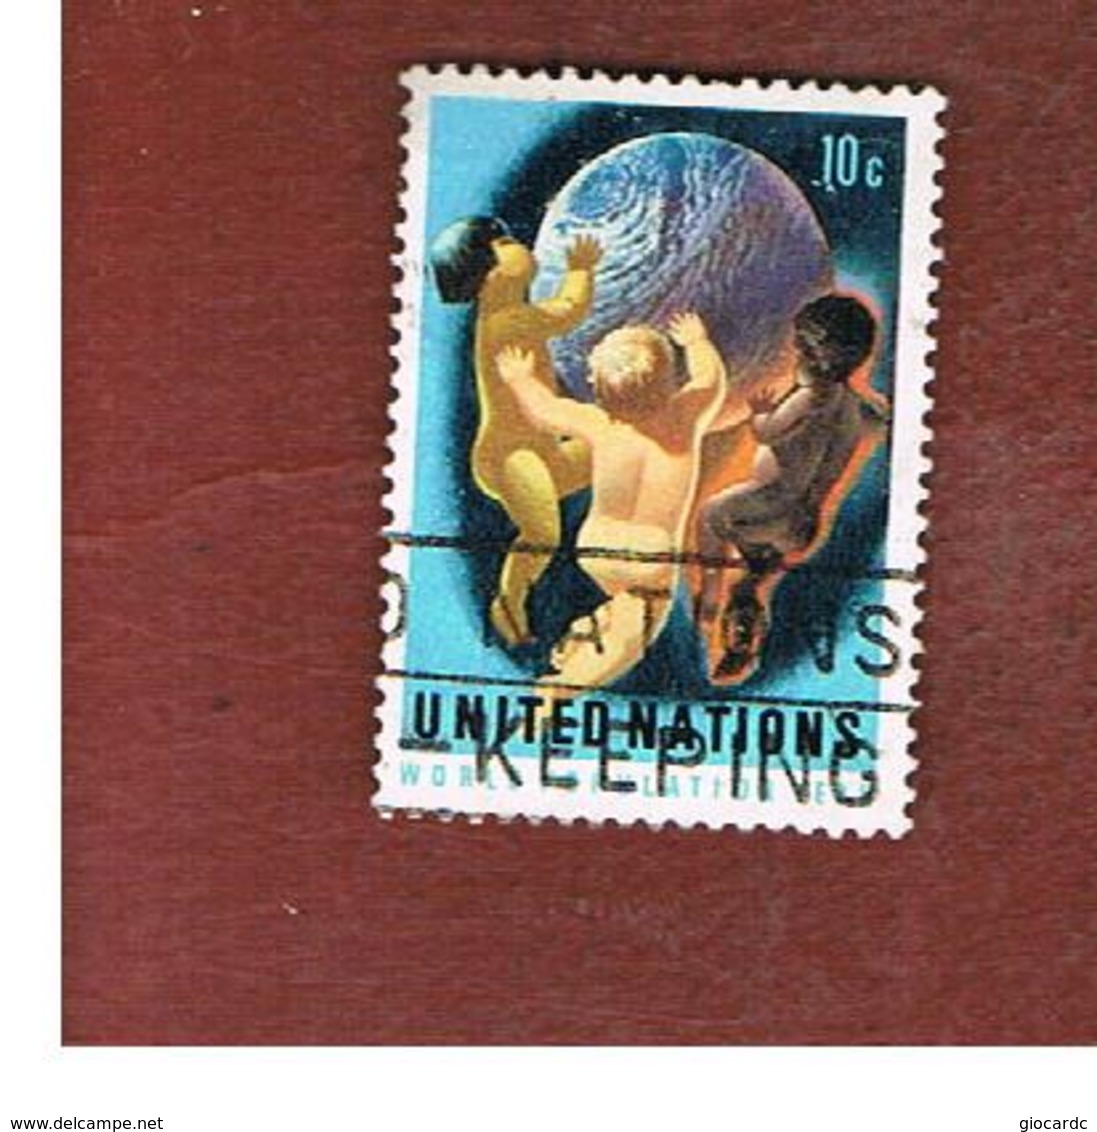 ONU (UNITED NATIONS) NEW YORK   - SG NY259   -  1974  WORLD POPULATION YEAR   - USED - Used Stamps